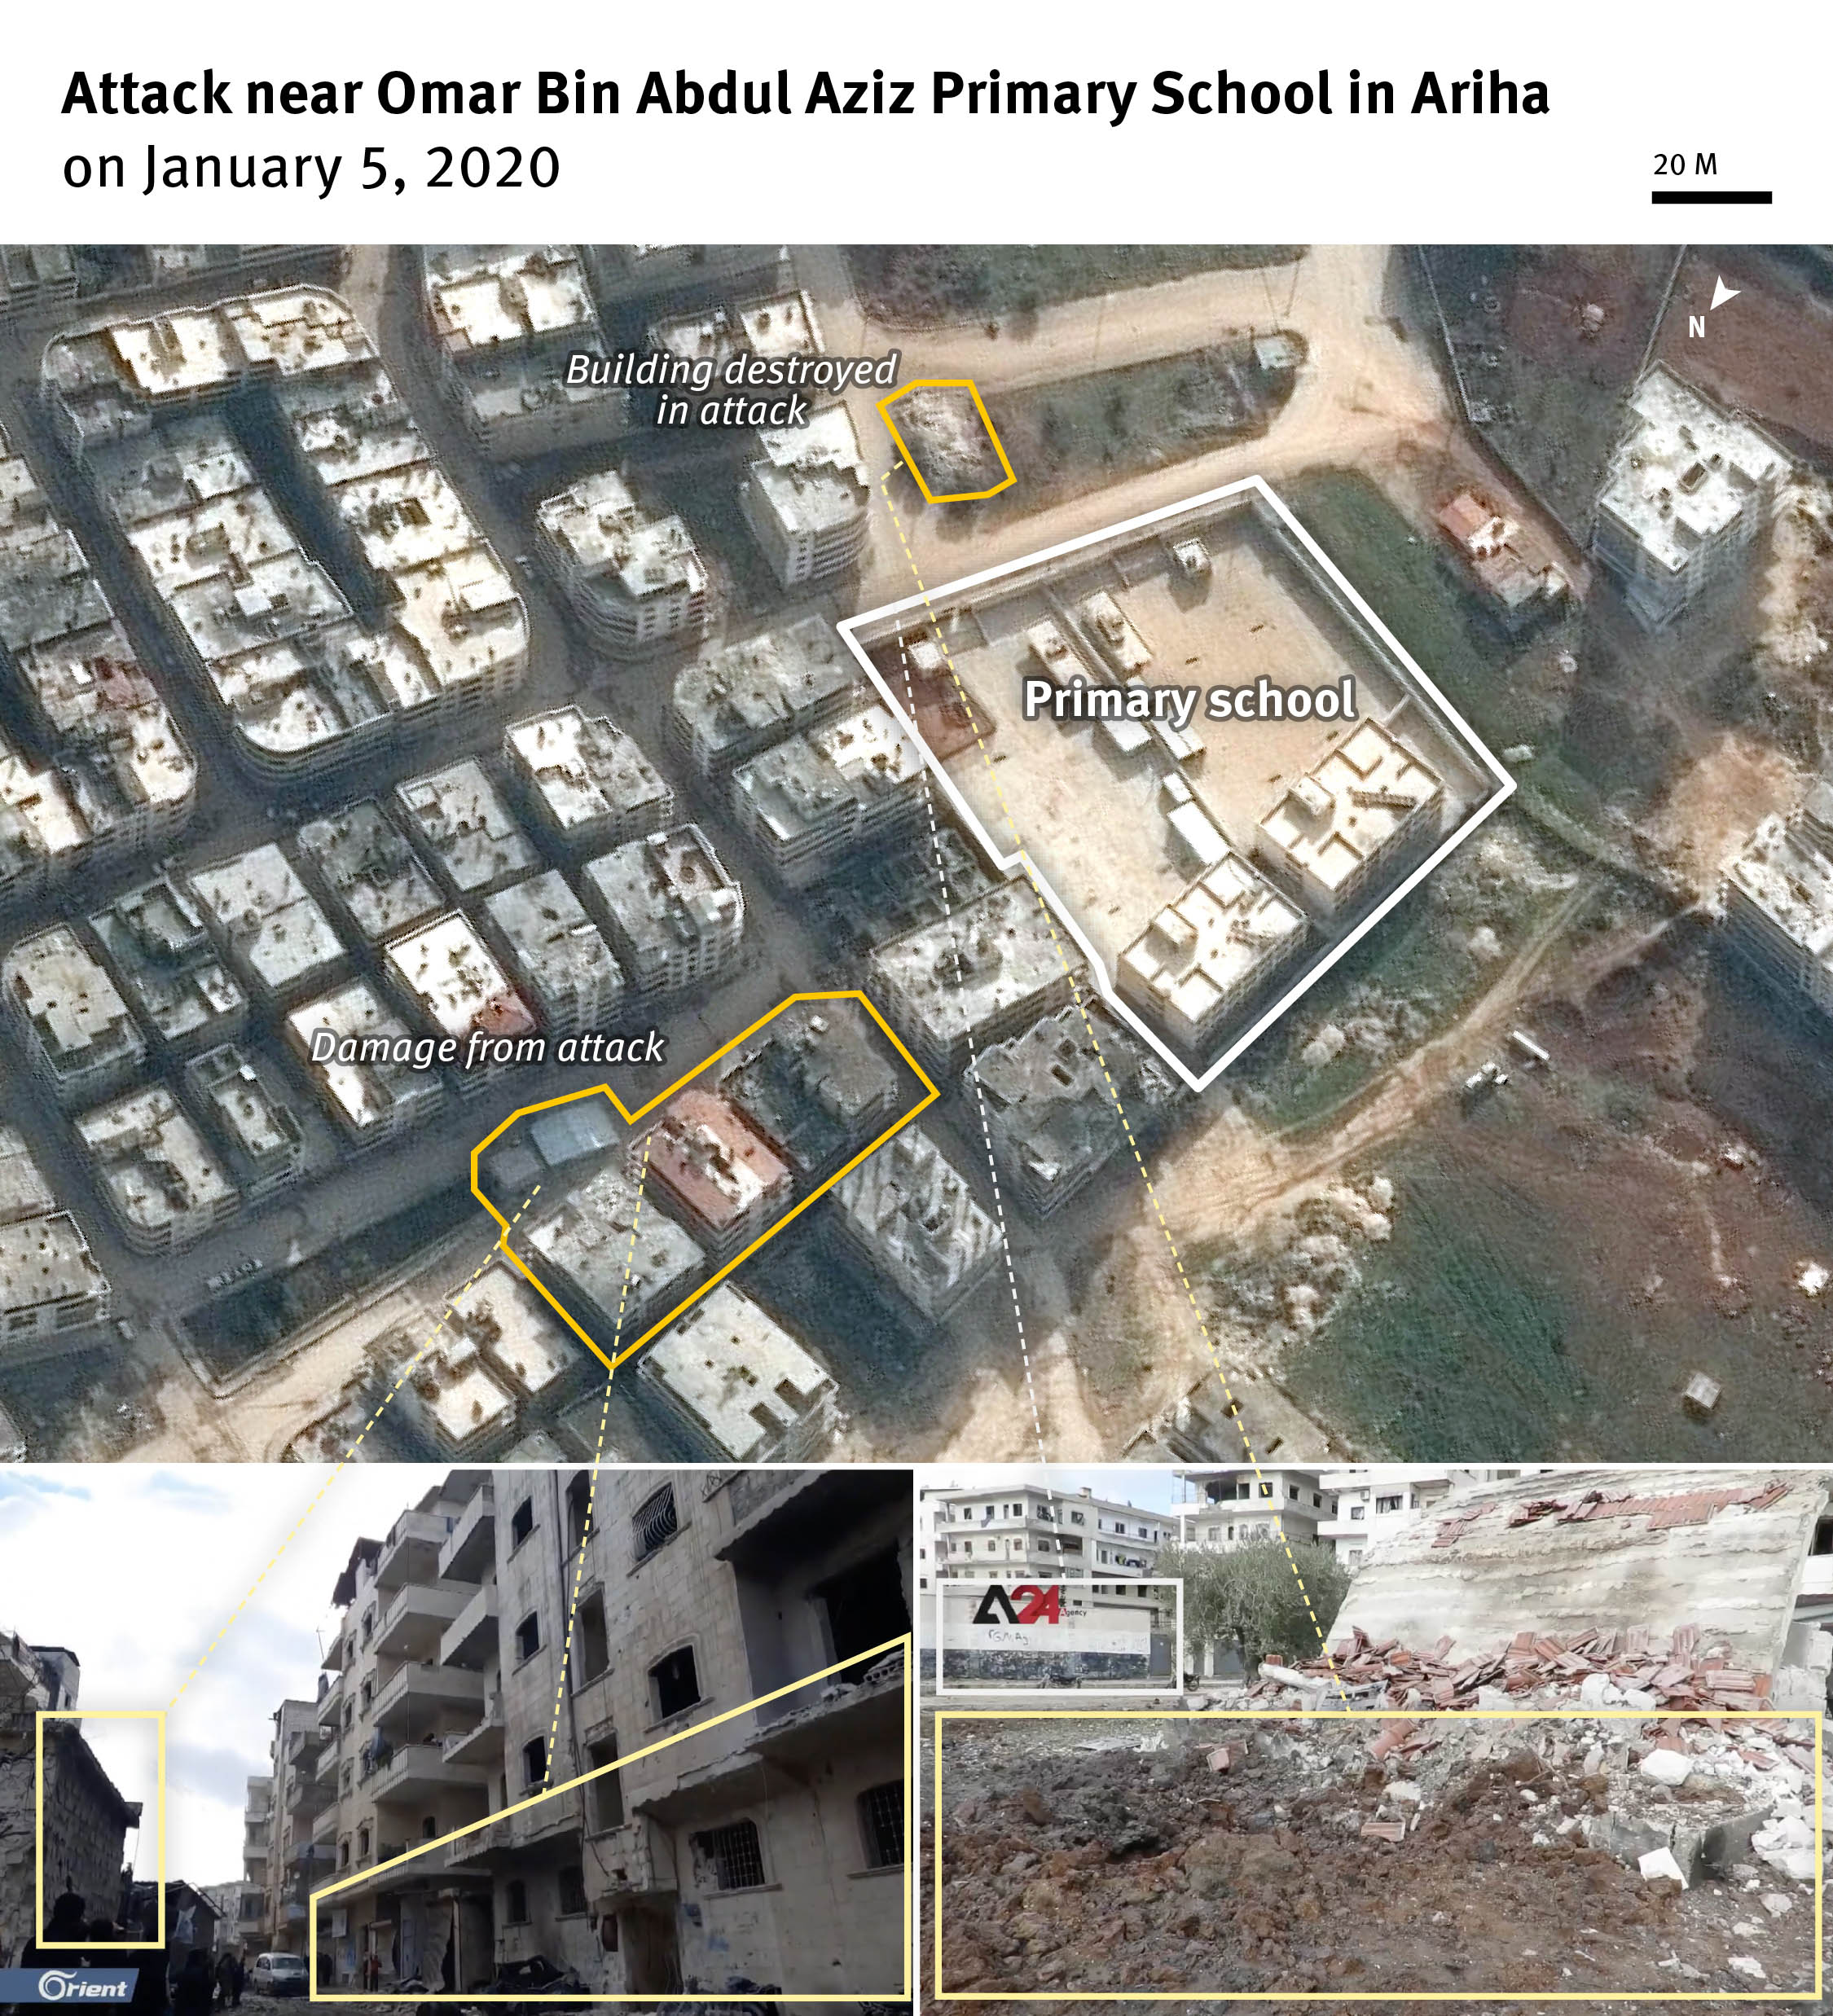 Satellite imagery showing an attack on a primary school on January 5, 2020